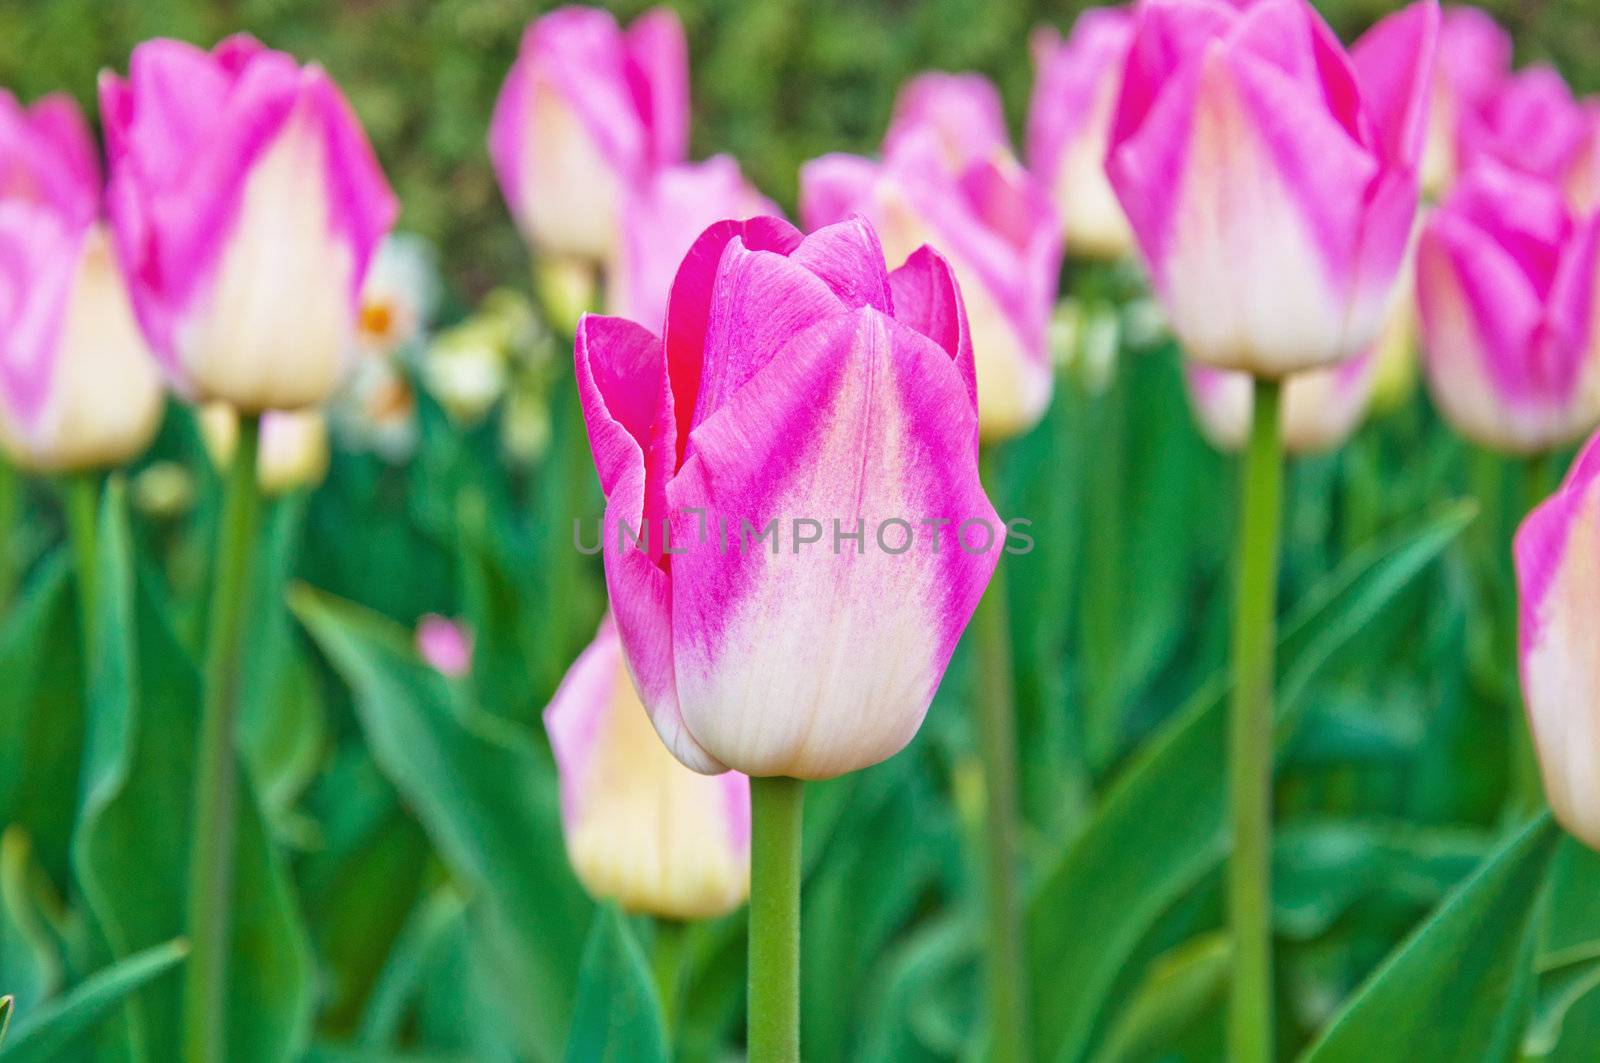 Beautiful pink tulips in the spring field.